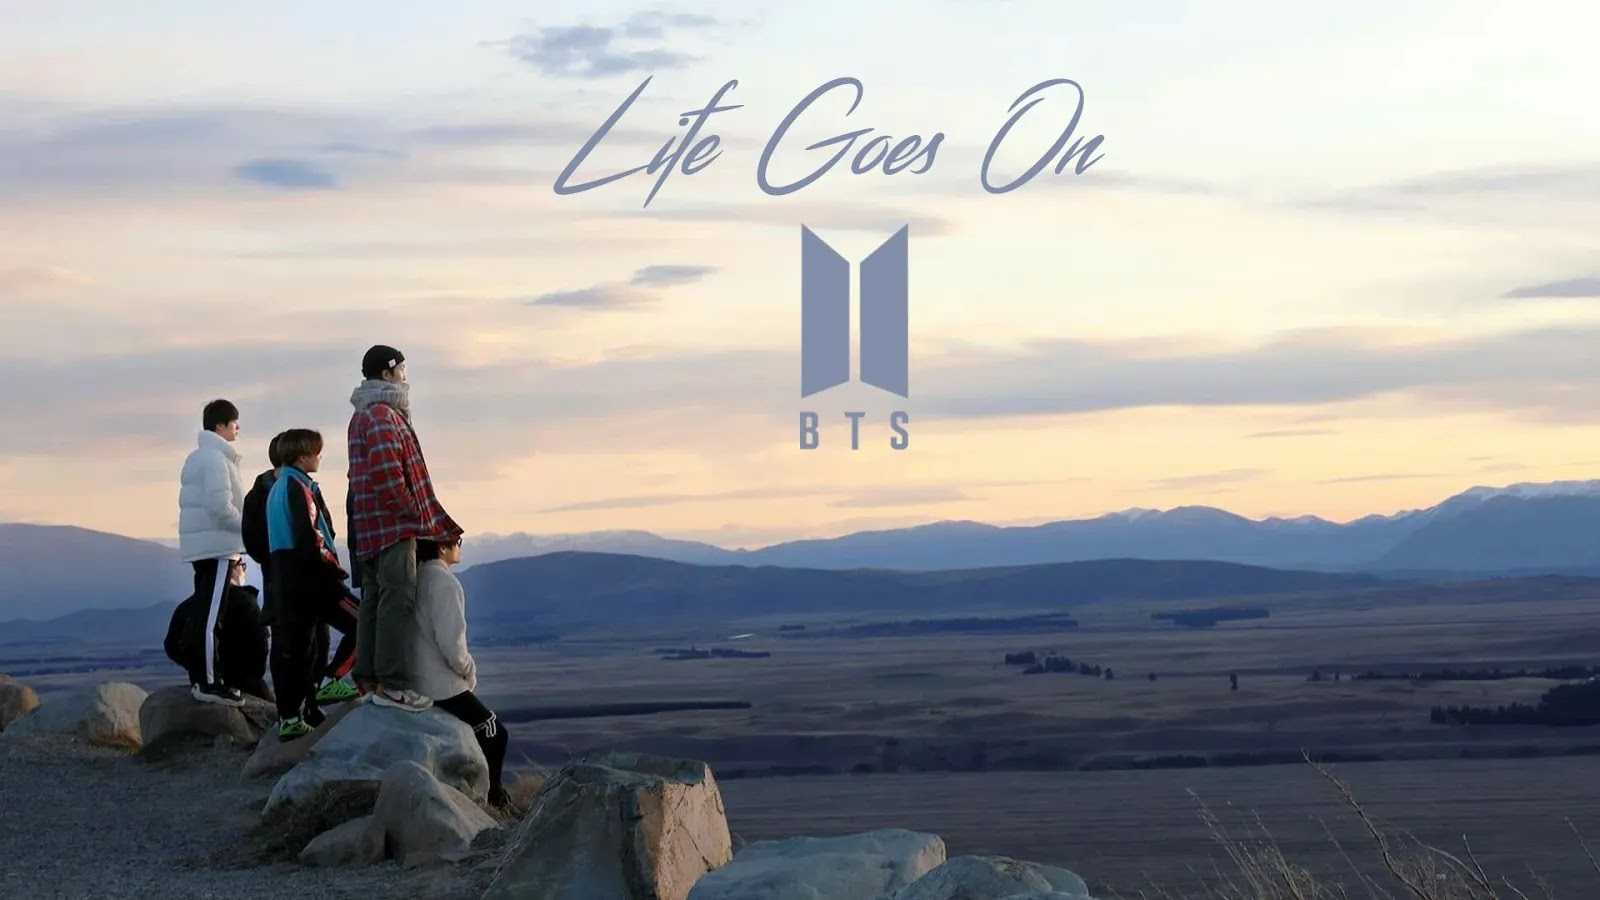 Life Goes On Wallpaper - NawPic